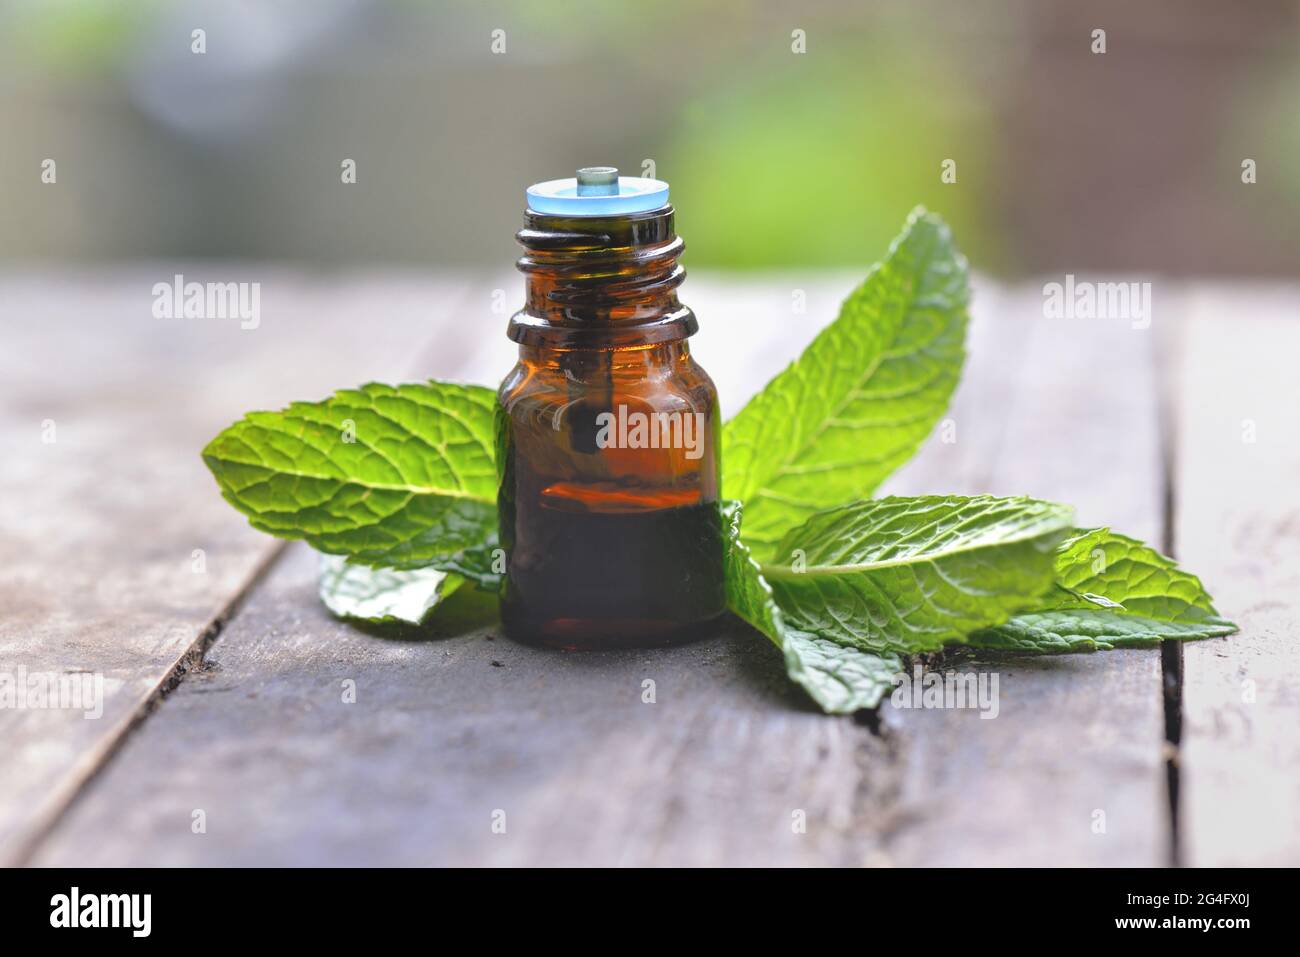 mint leaf with a bottle of aromatic oil on a wooden table Stock Photo